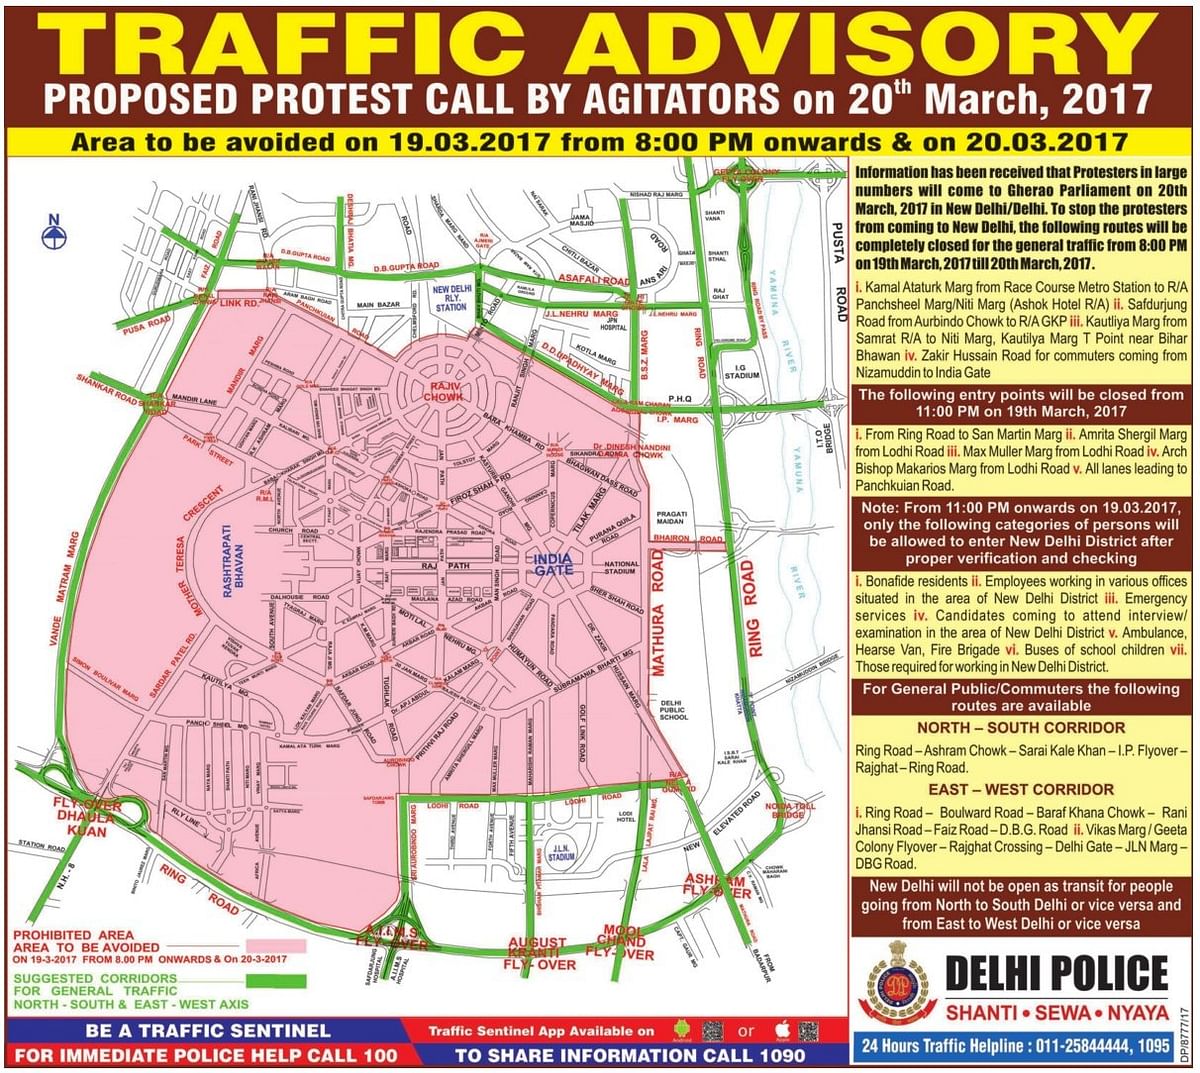 The Delhi Police had earlier issued a traffic advisory listing routes and entry points closed to the public.